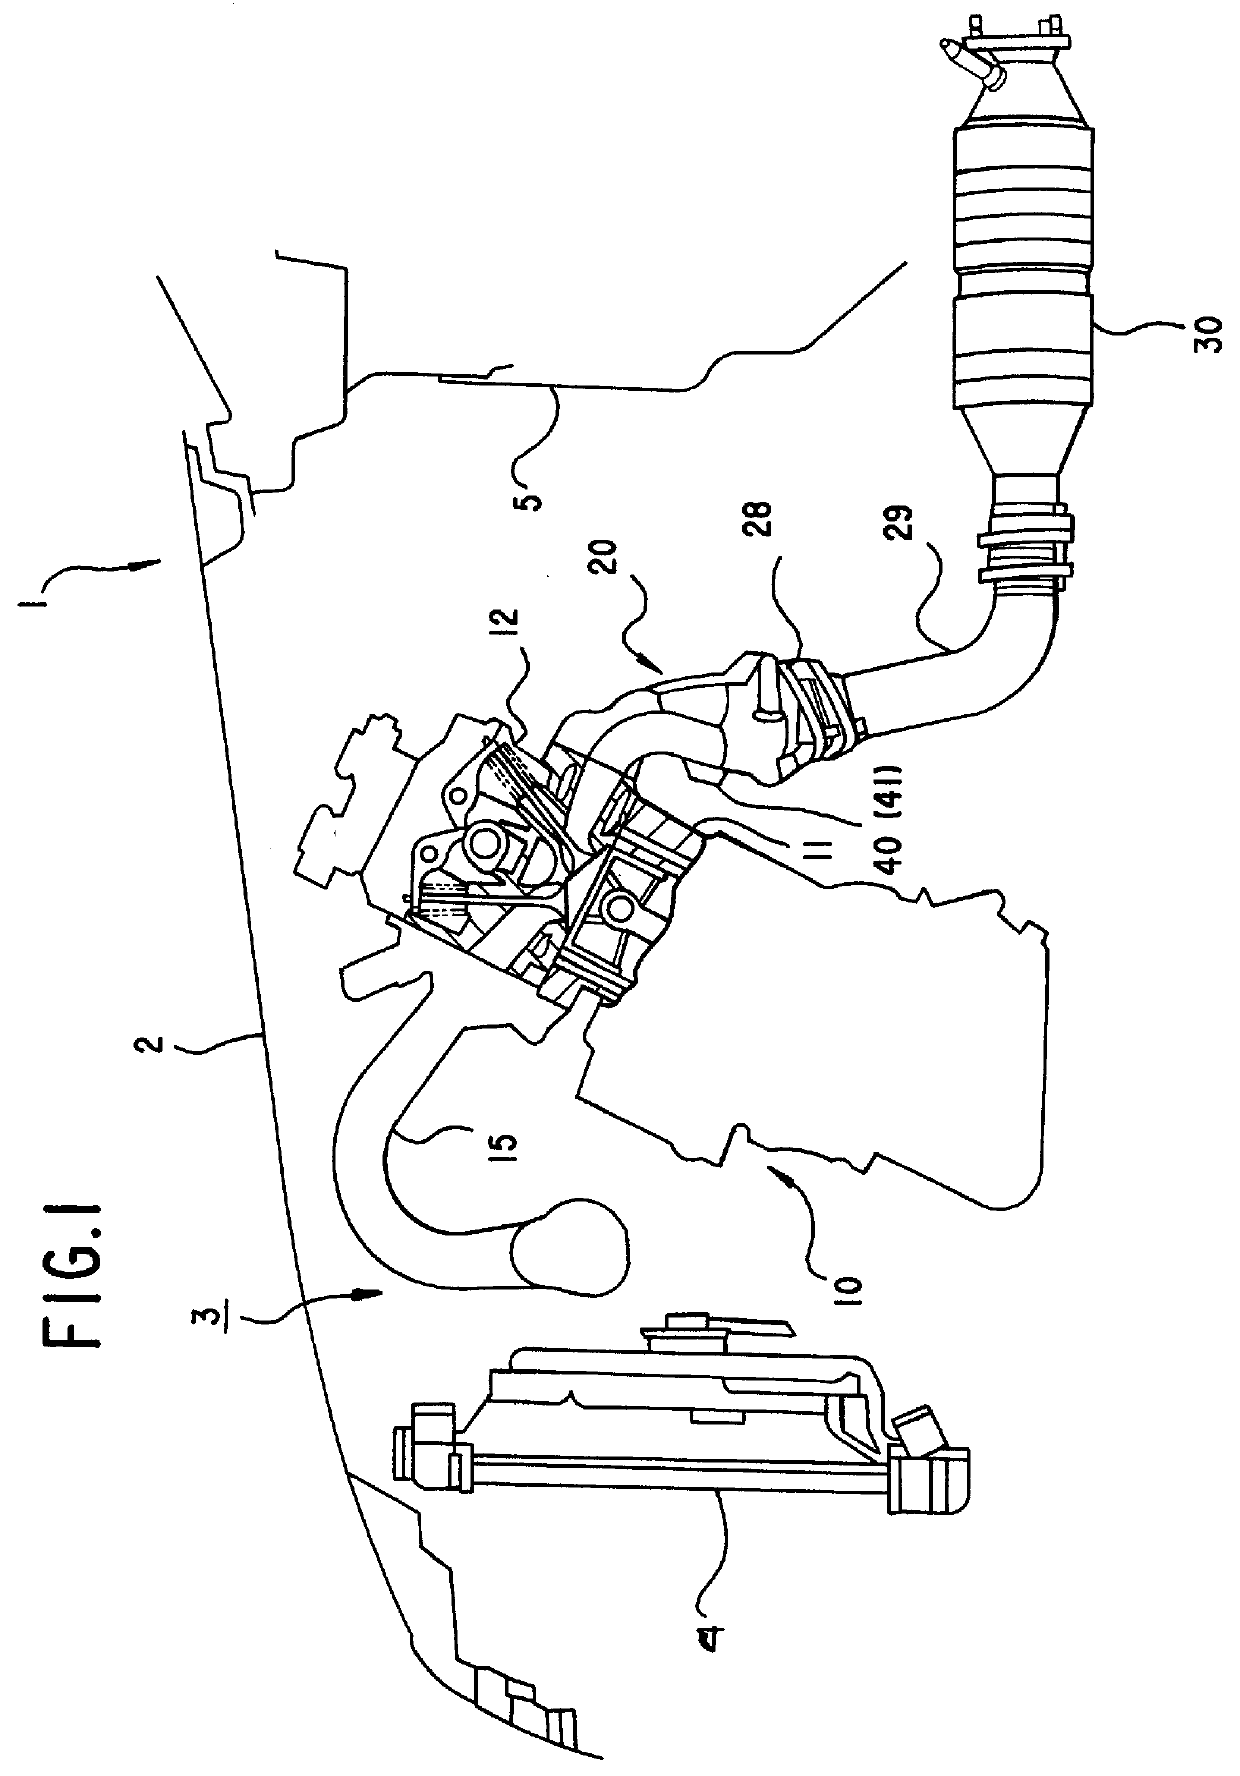 Exhaust manifold of multi-cylinder internal combustion engine